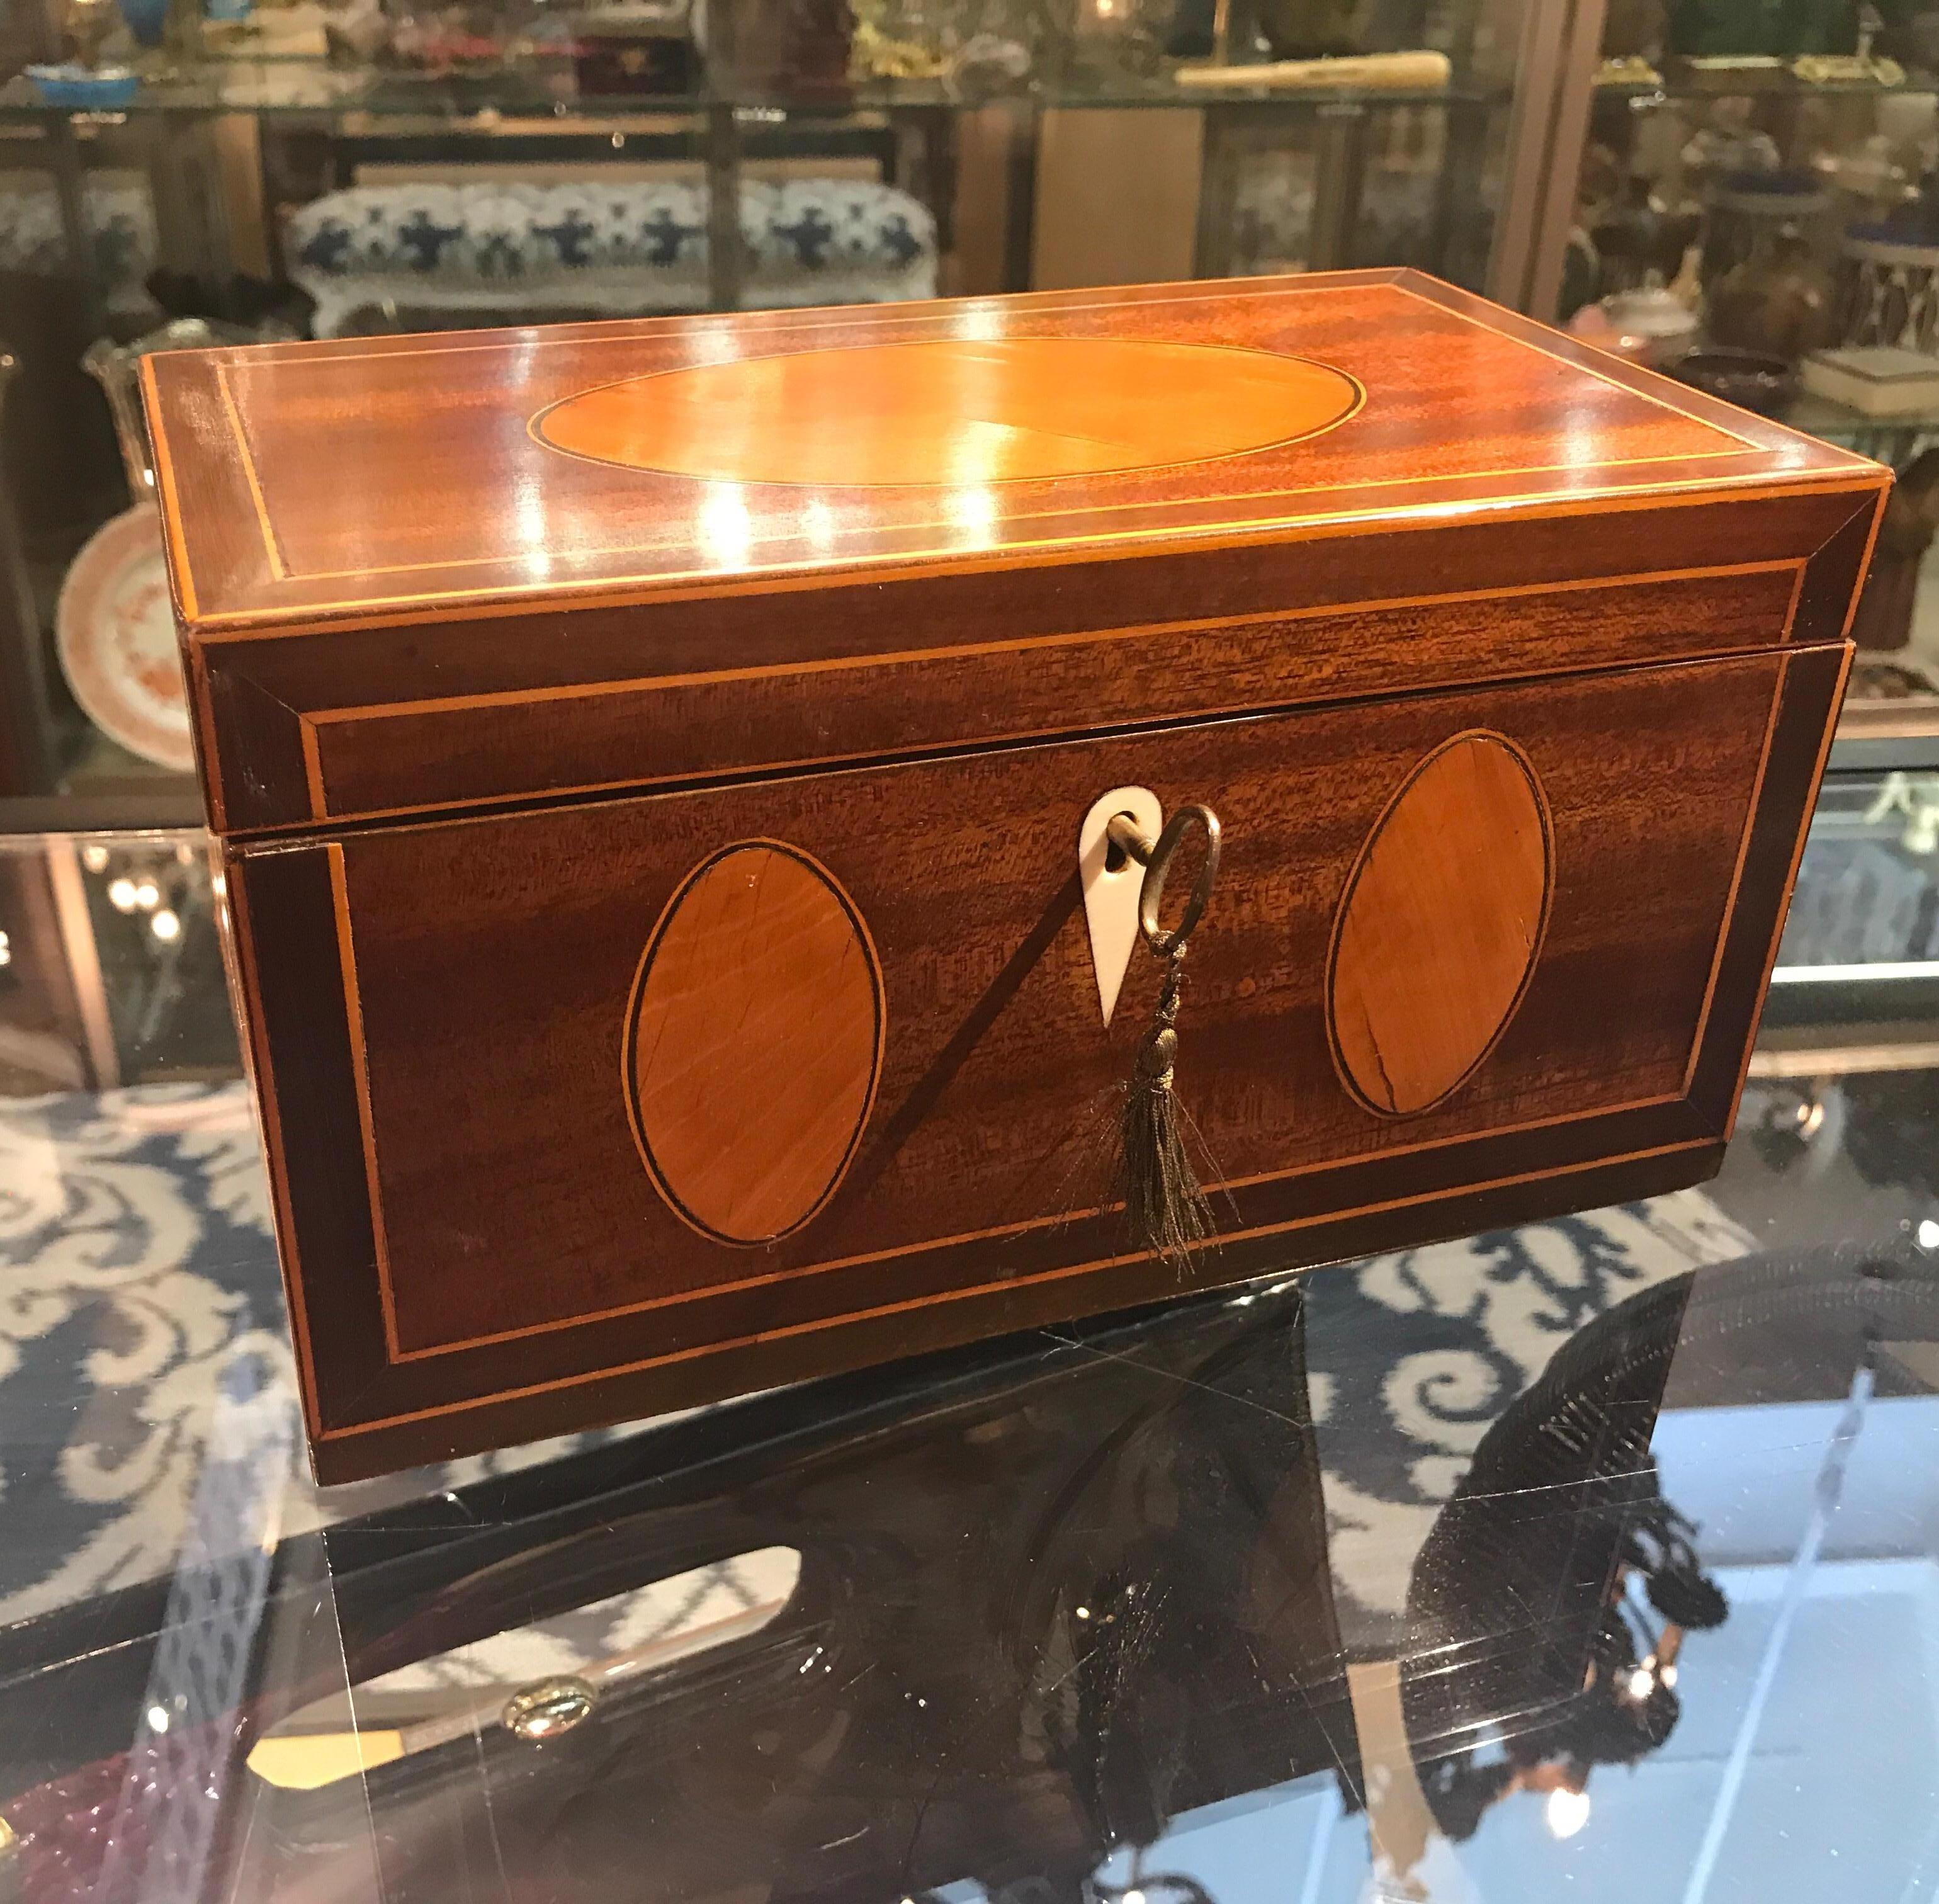 Pure elegance in mahogany and satinwood. This Regency style locking box with mahogany background with oval panels and hand inlaid stainwood with delicate ebony string inlay accent. The oval panes are a sign of a very skilled cabinetmaker. The paper